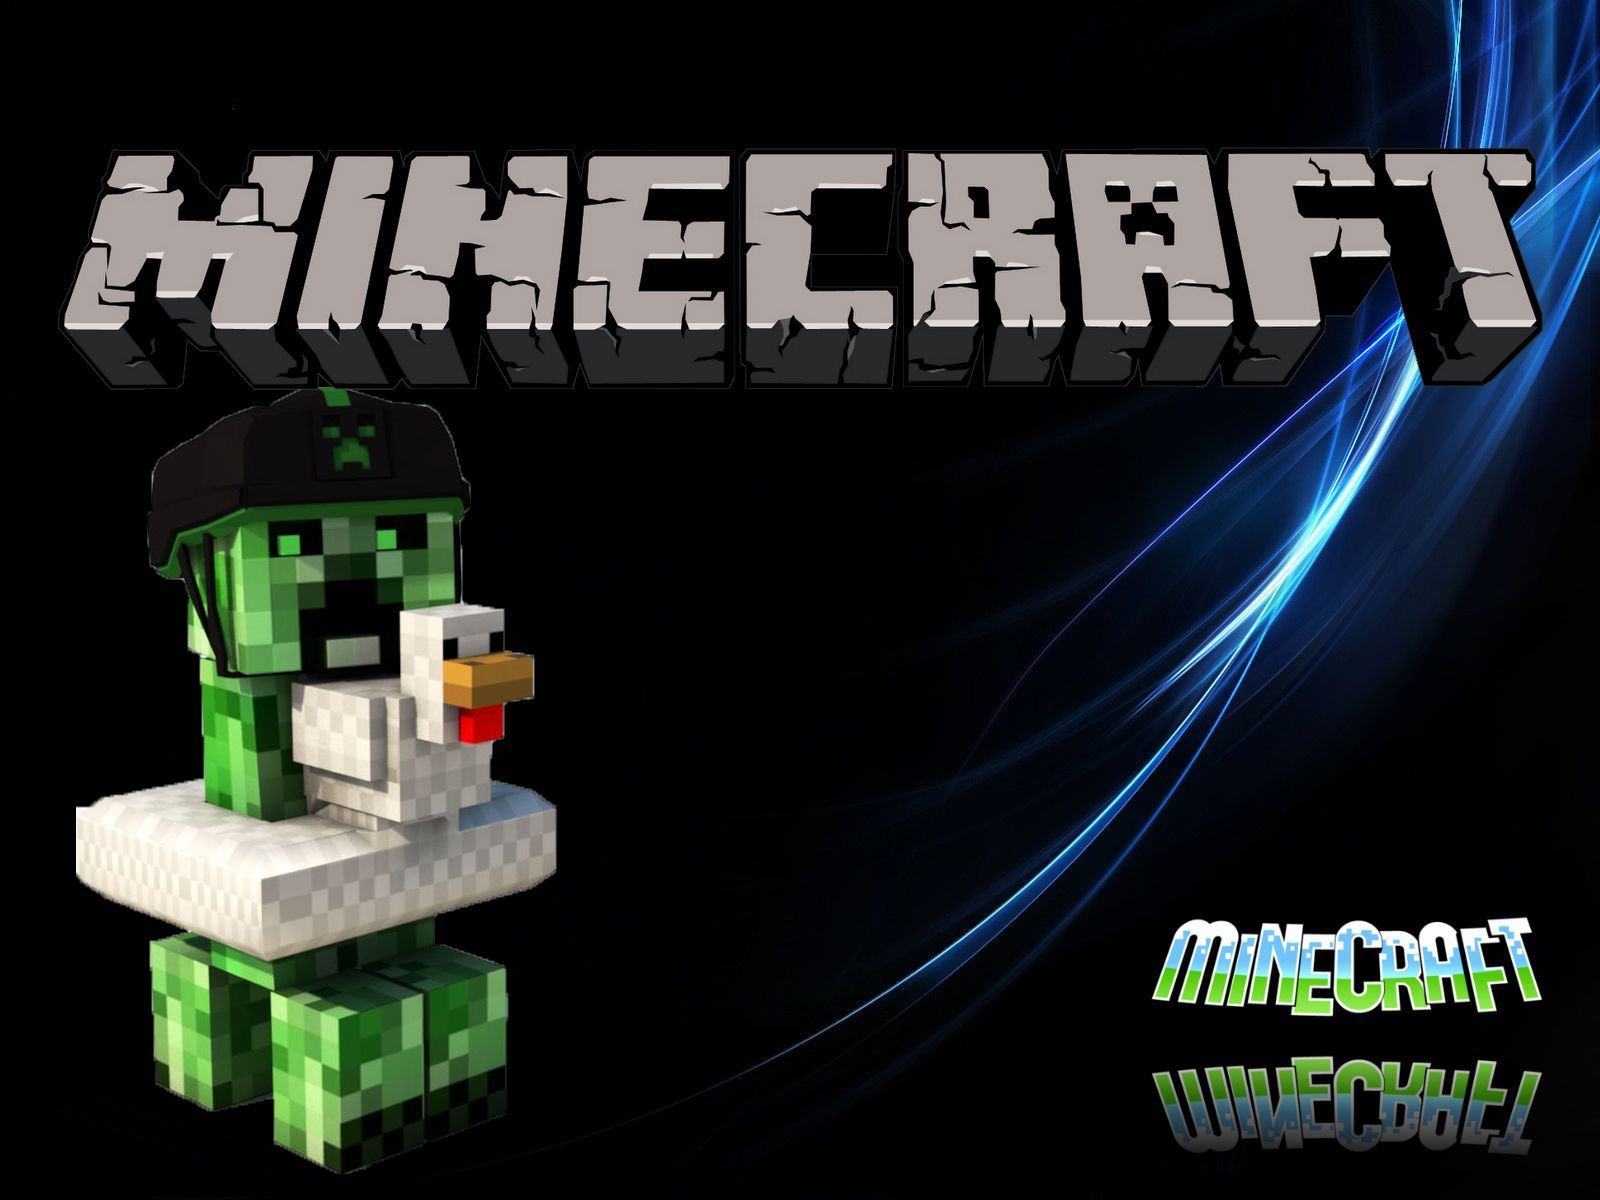 More awesome minecraft wallpapers | #1 Design Utopia Trend